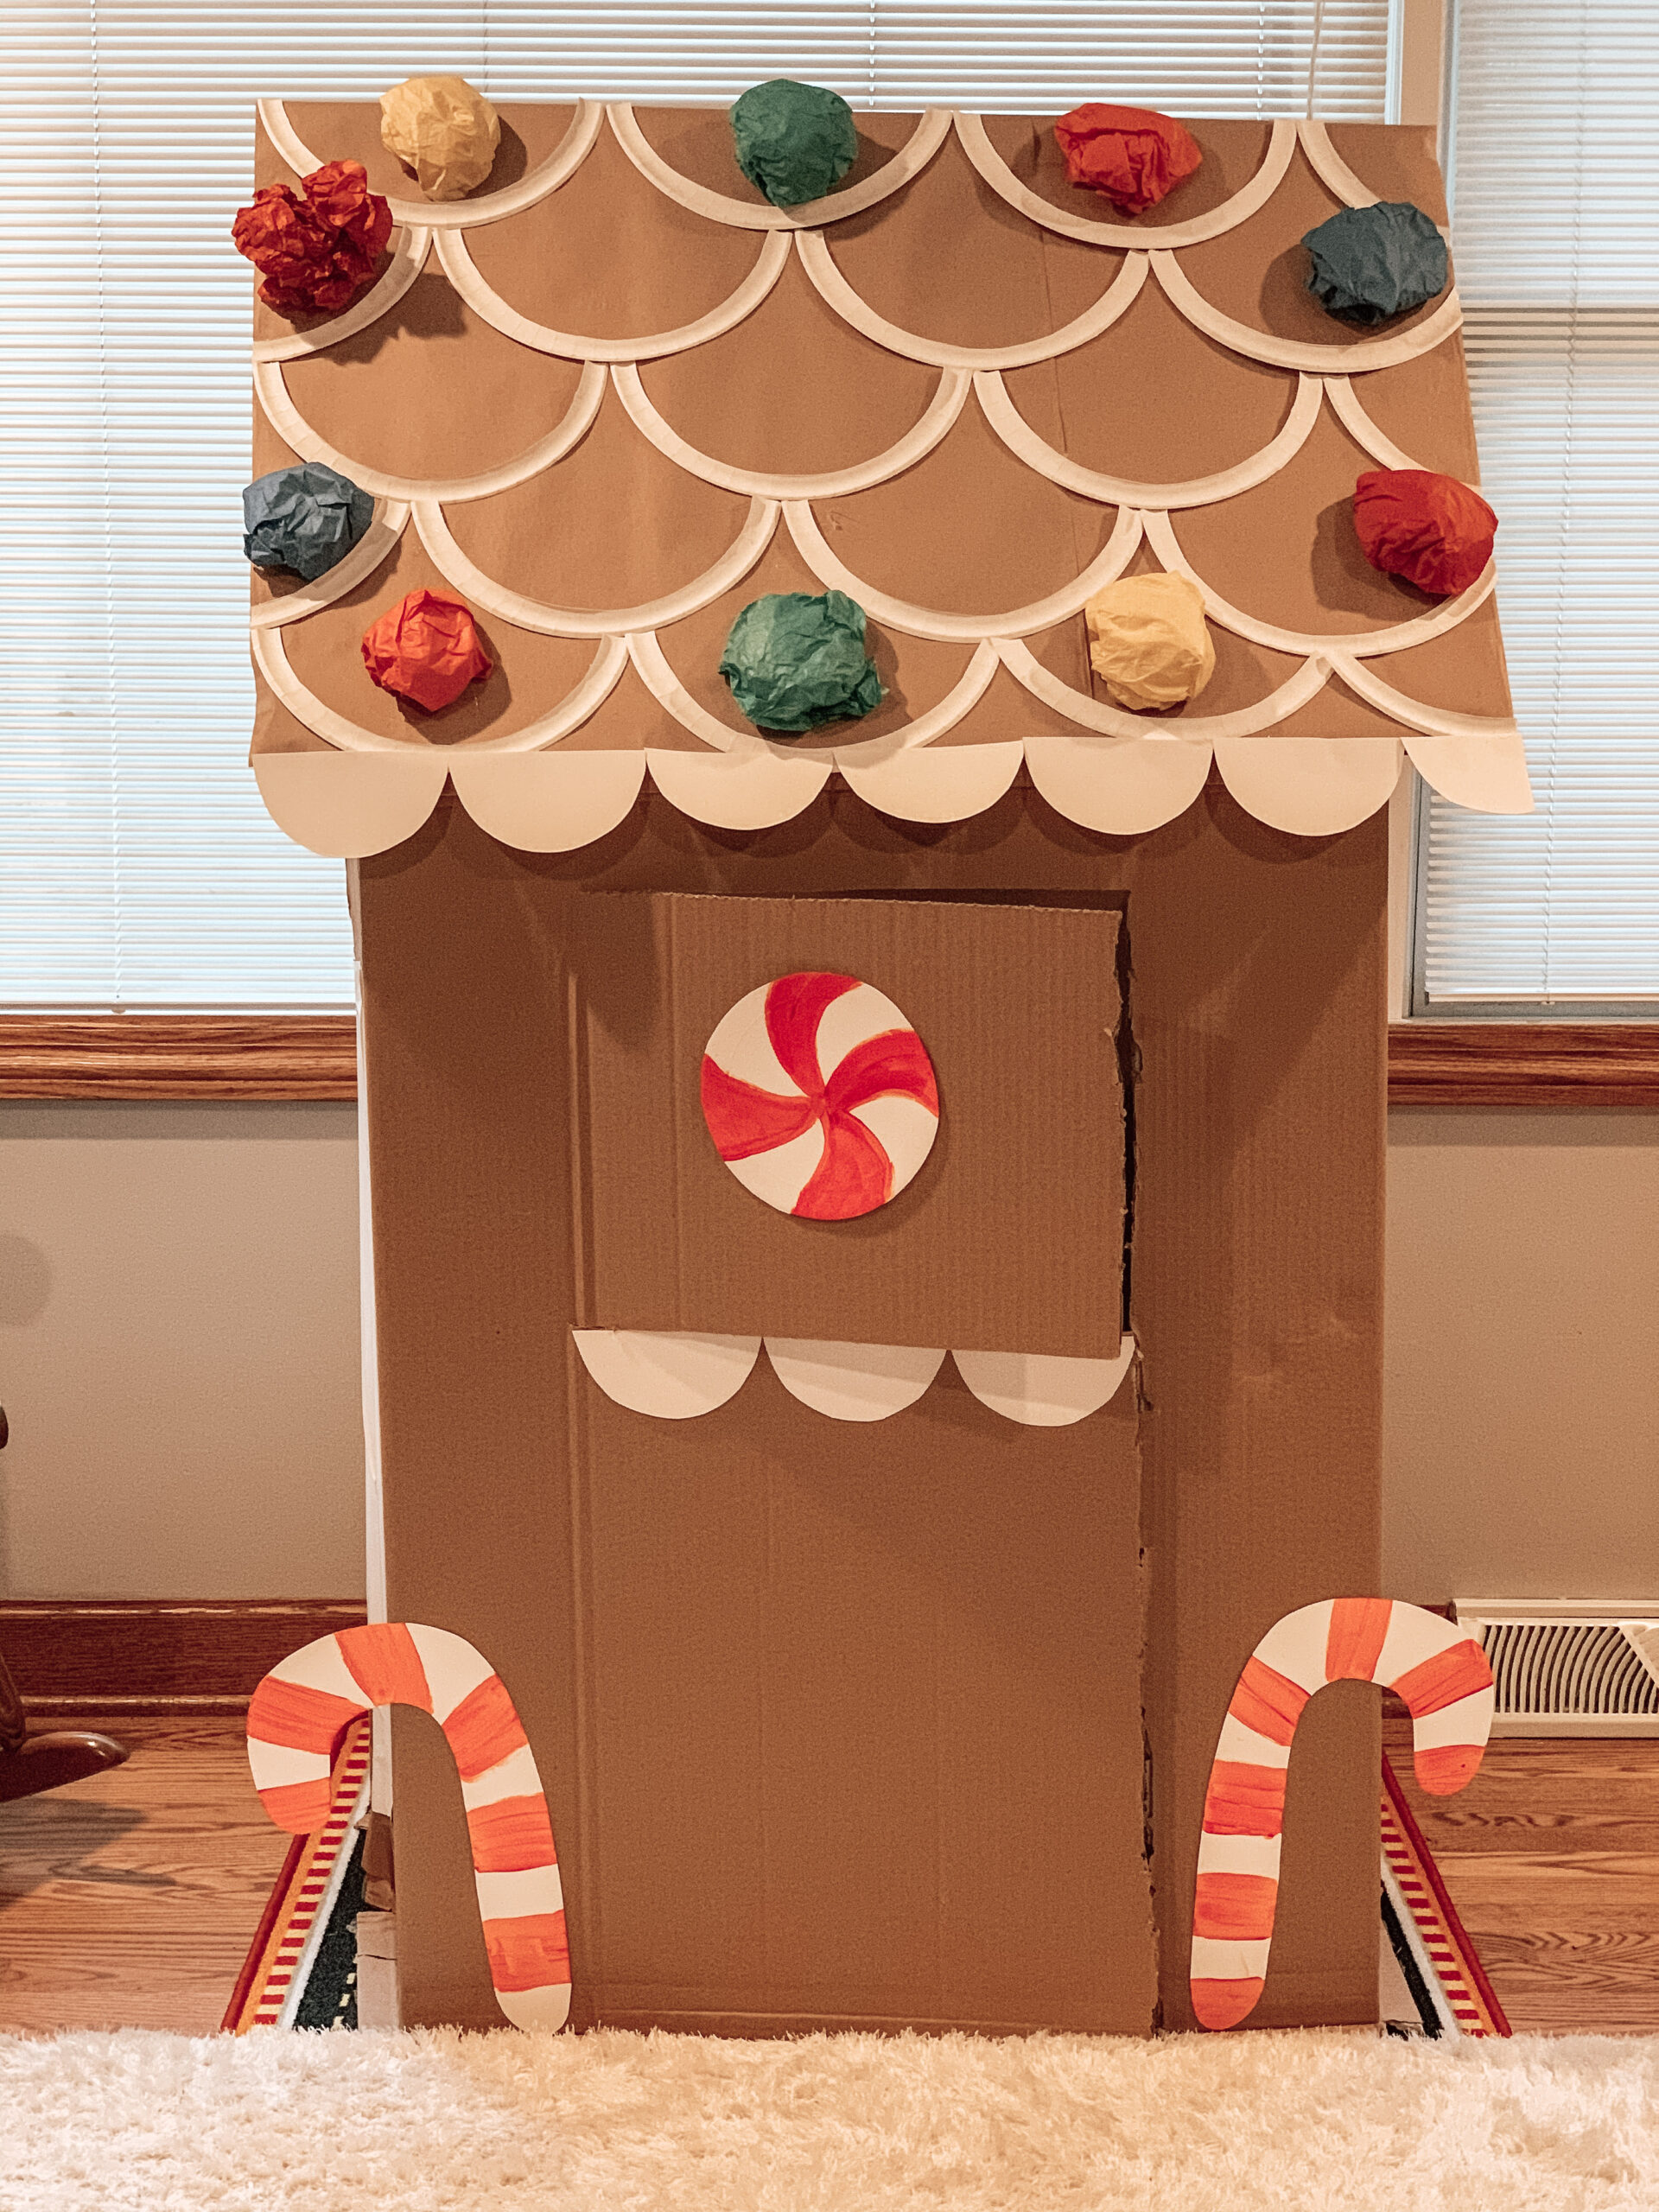 Completed repurposed cardboard box gingerbread house. A cardboard activity for kids to play with